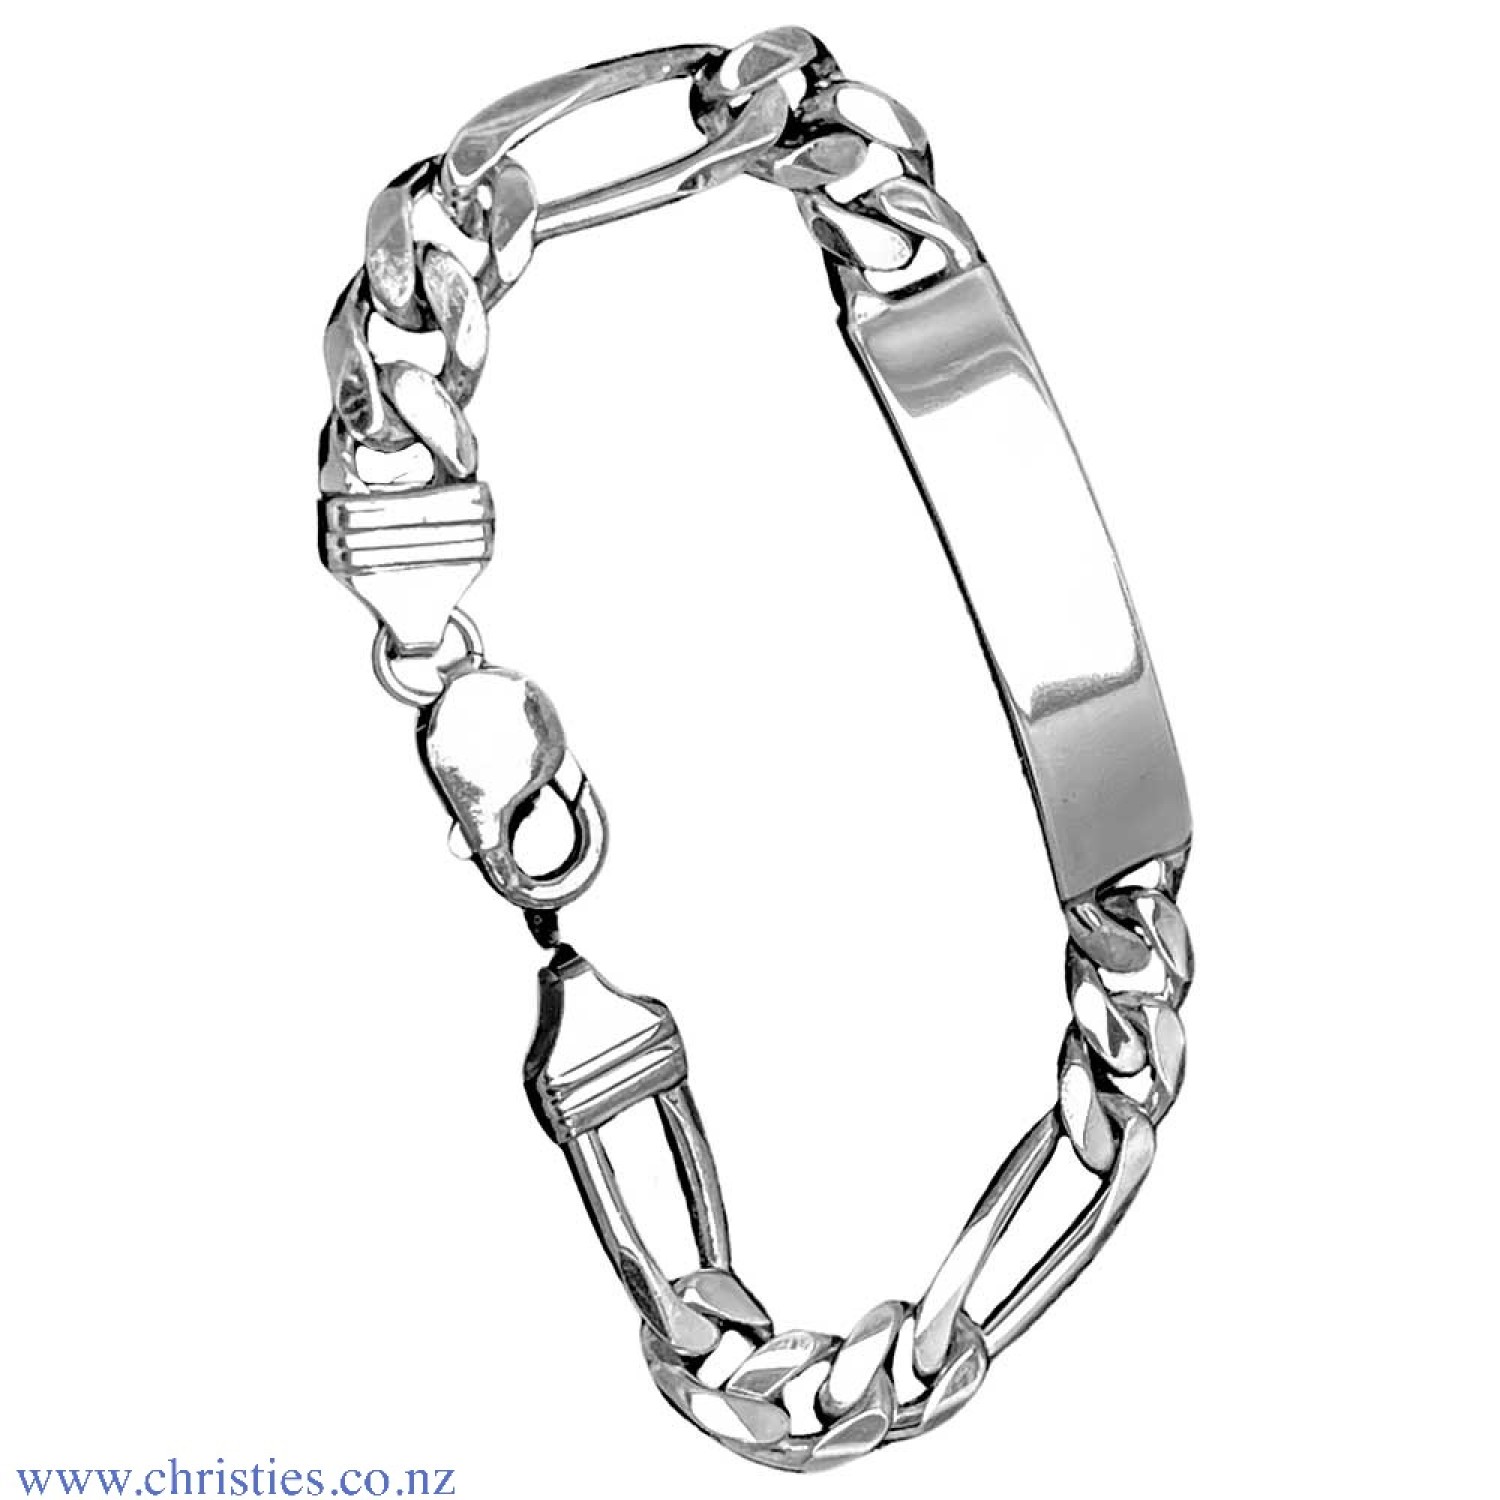 IDFG250H6C Sterling Silver ID Figaro Medium Bracelet. Medium weight  Identification bracelet crafted in 925 sterling silver  Afterpay - Split your purchase into 4 instalments - Pay for your purchase over 4 instalments, due every two weeks. You’ll pay @chr